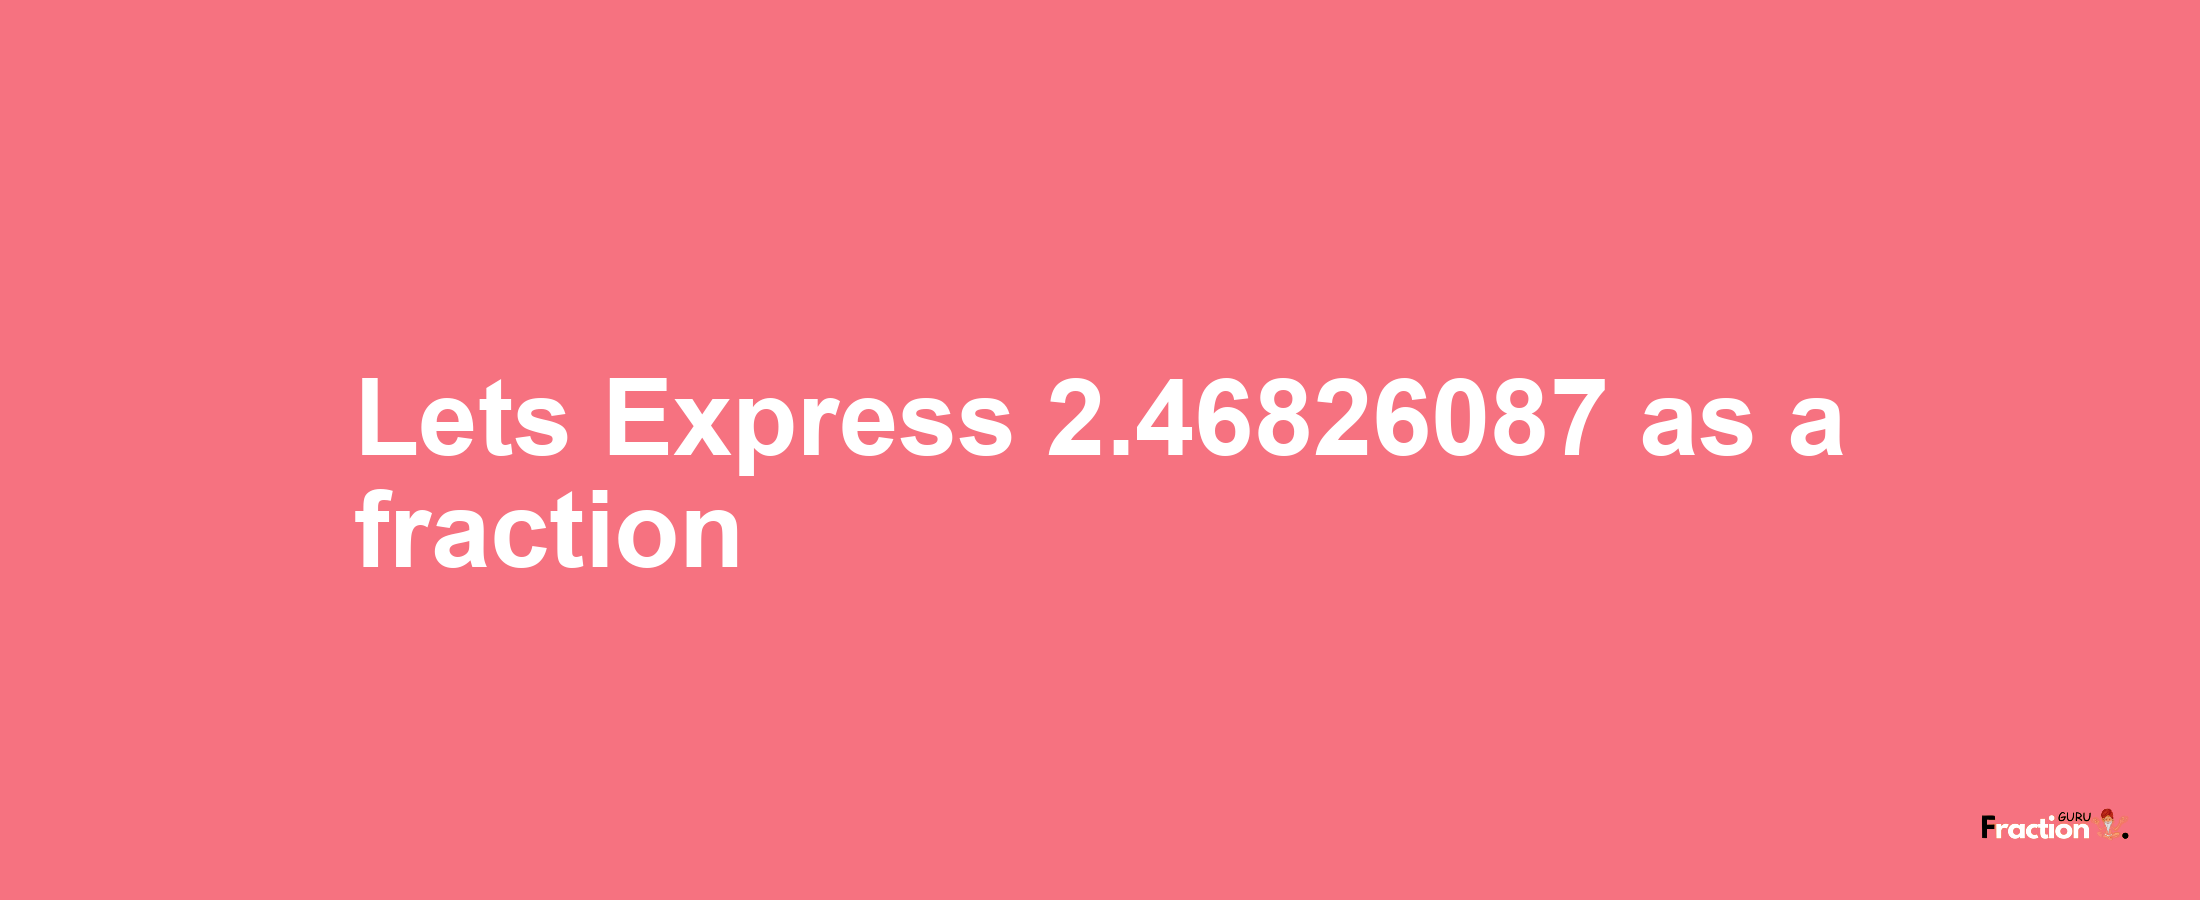 Lets Express 2.46826087 as afraction